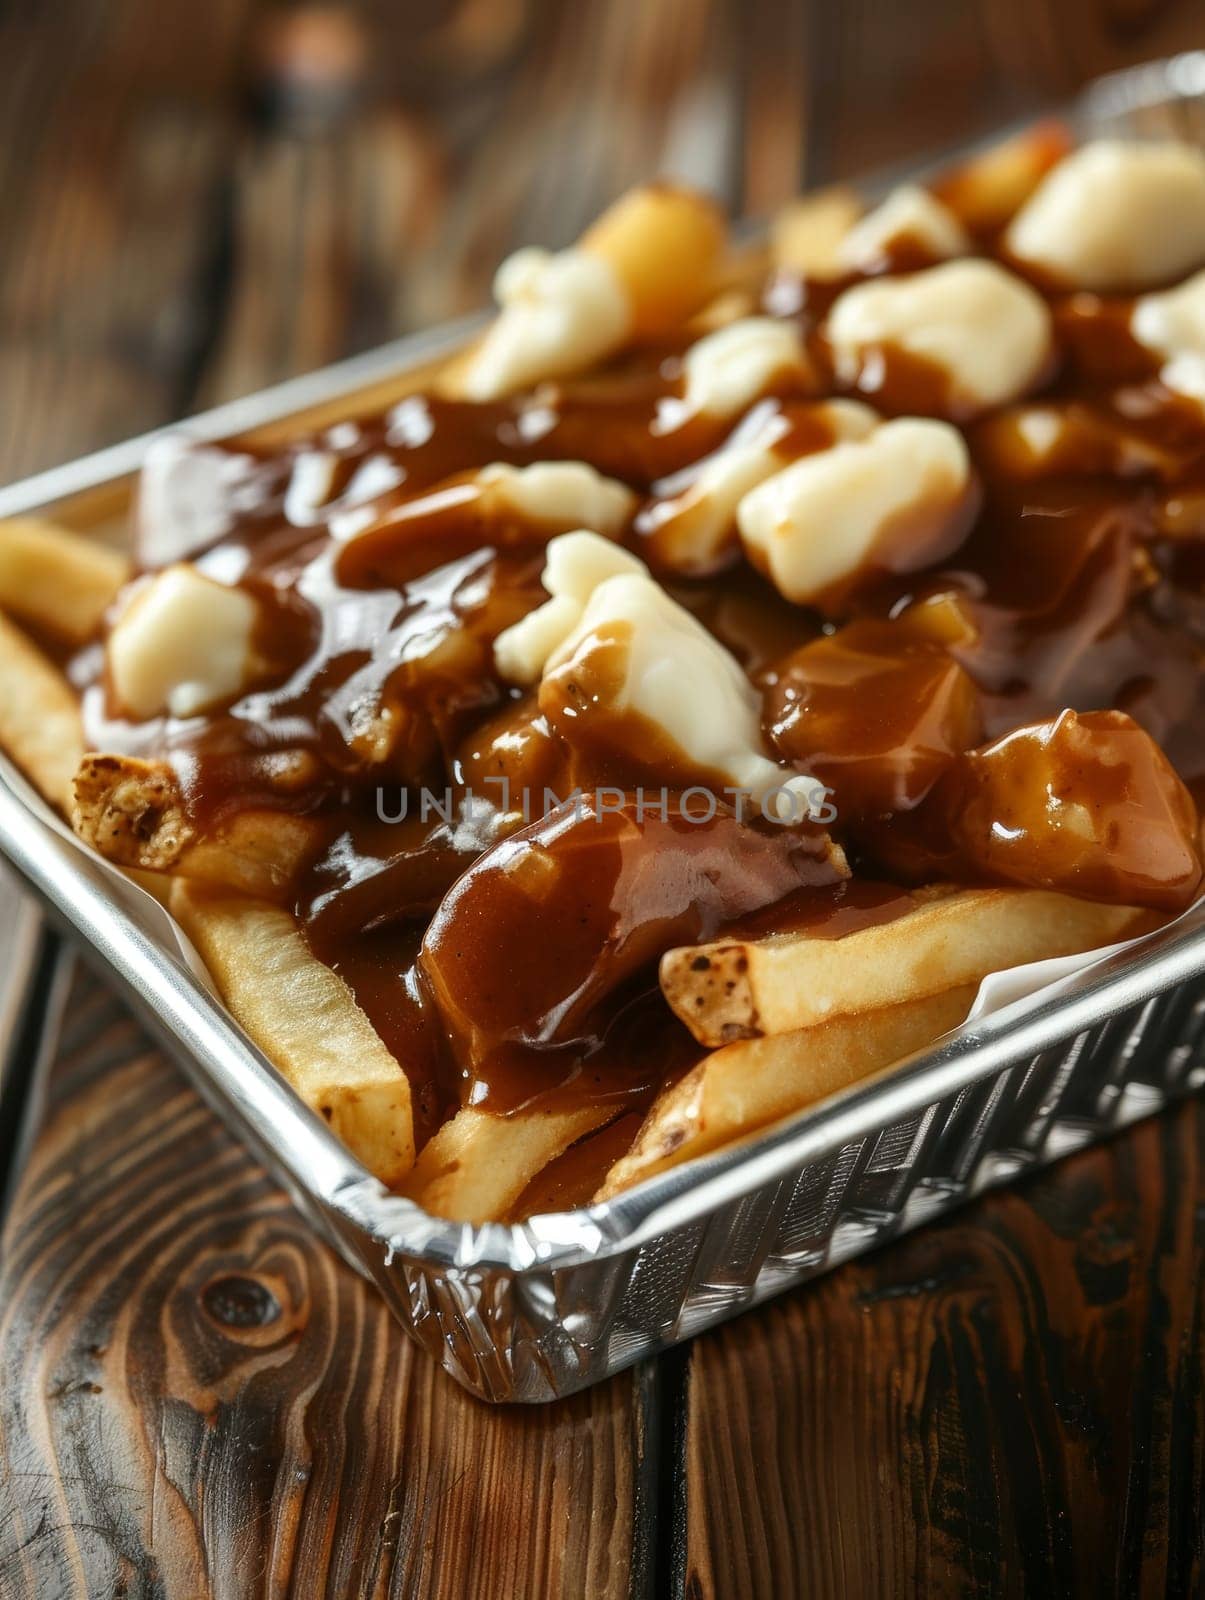 Canadian poutine in a tray, with fries, cheese curds, and brown gravy. A classic and comforting dish from Canada